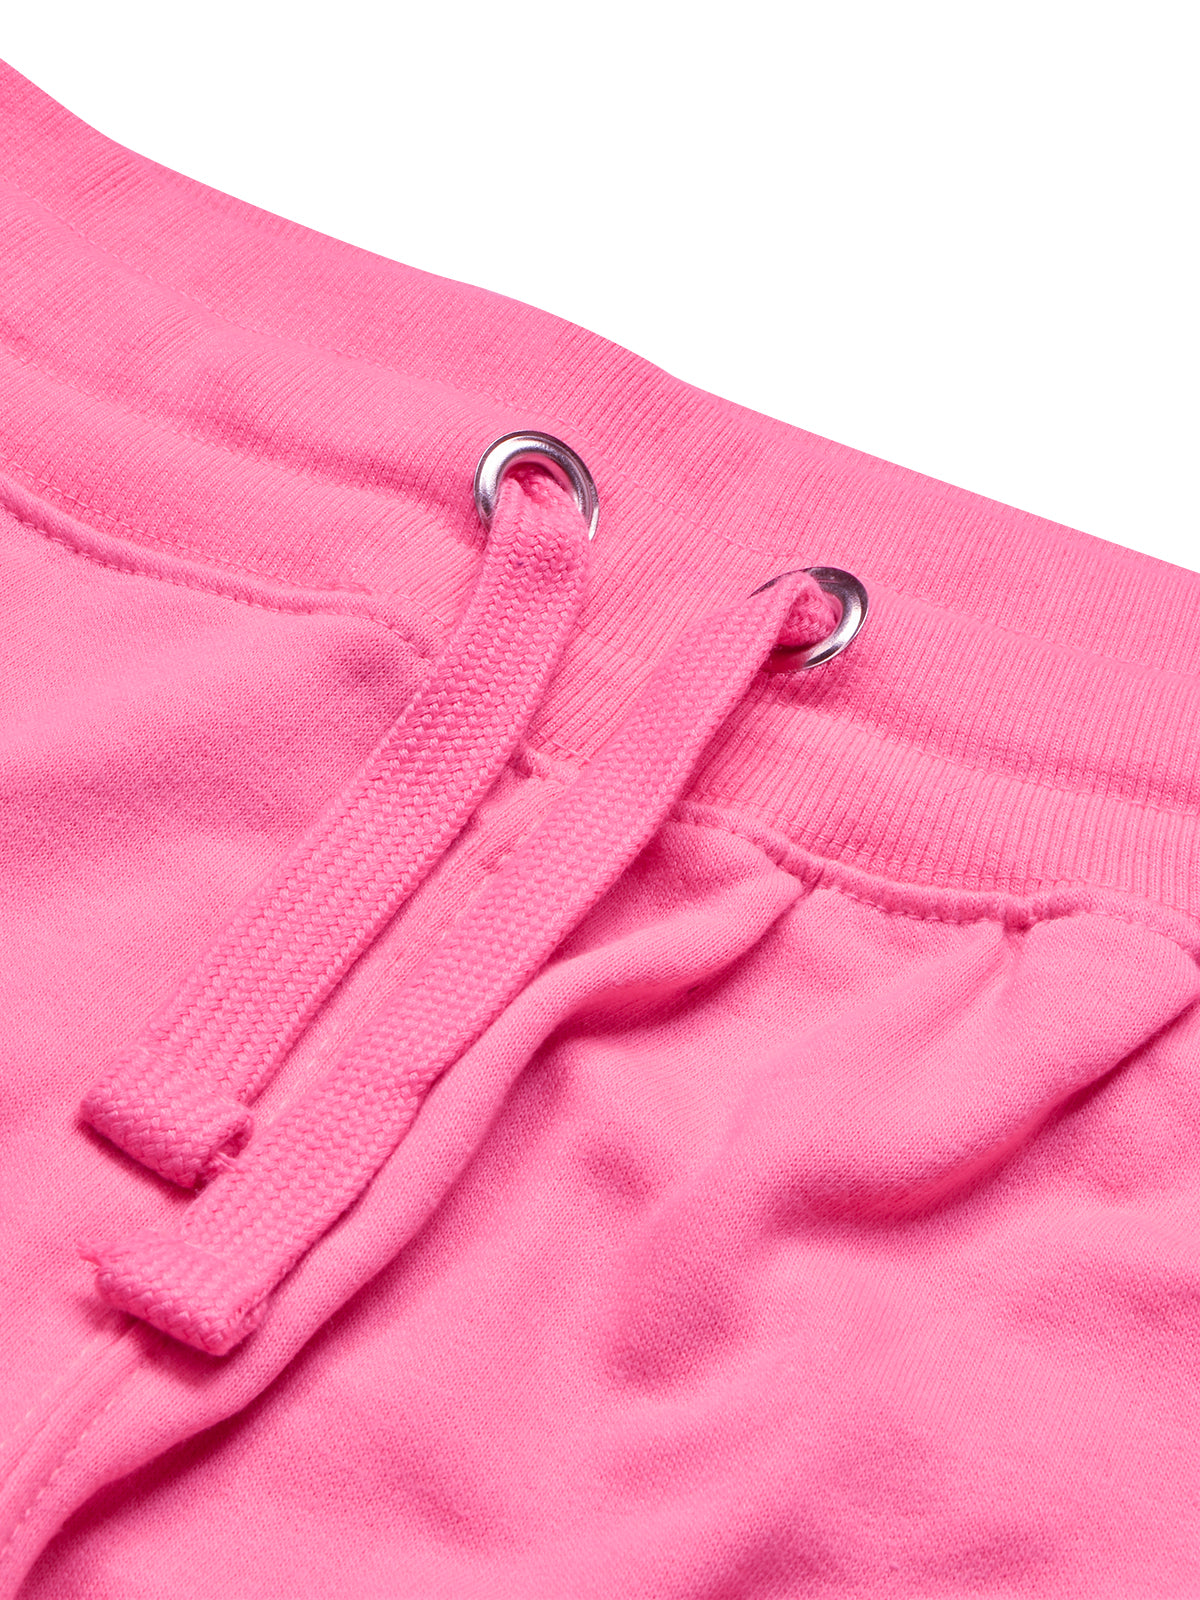 16Sixty Fleece Zipper Tracksuit For Men-Pink with White Panels-BE34/BR873